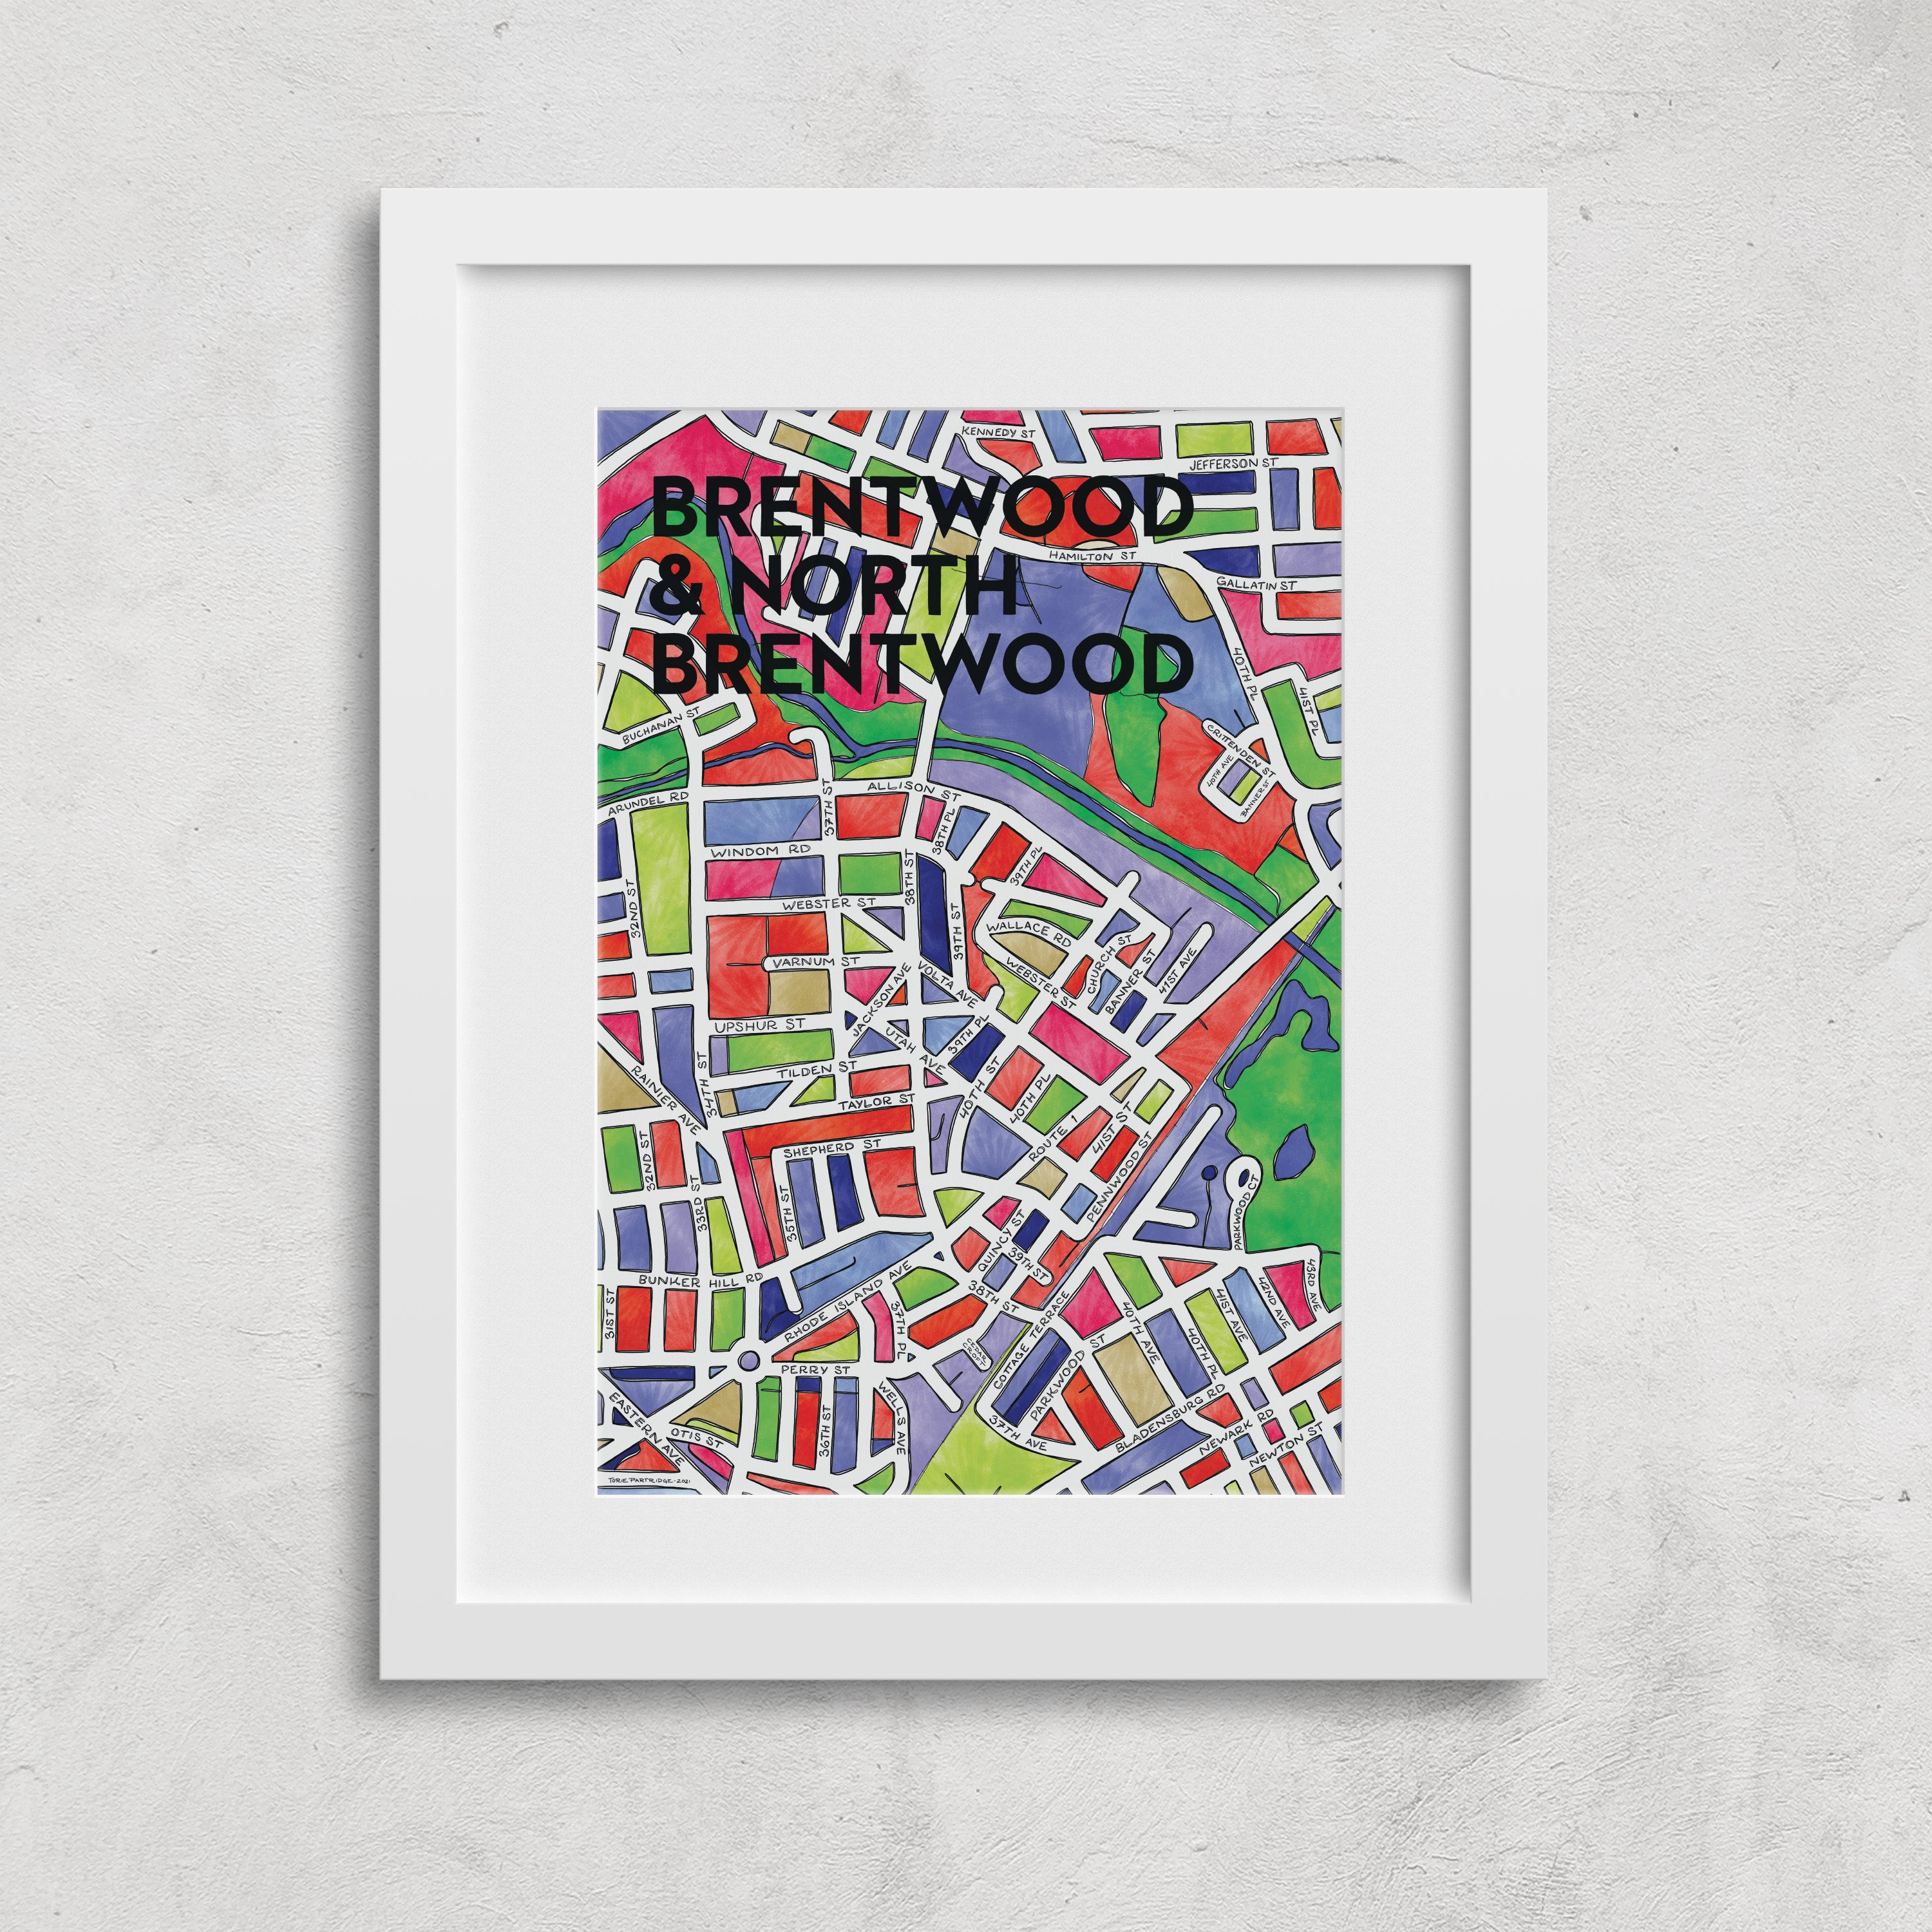 Brentwood & North Brentwood, MD Print